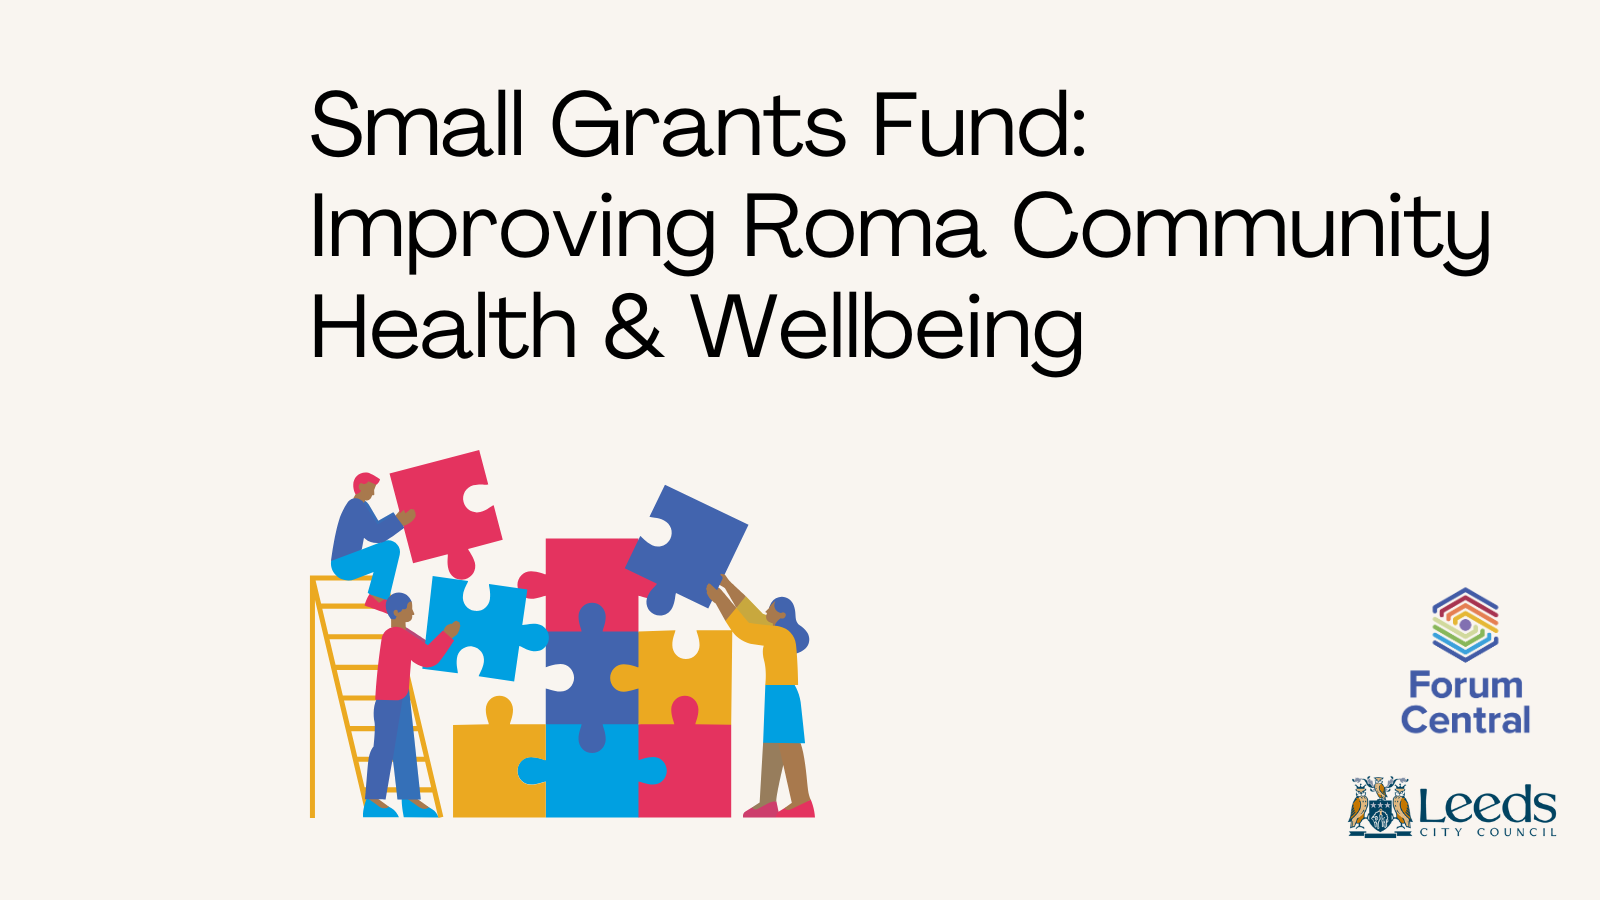 Small grants fund for improving Roma community health and wellbeing by Forum central and leeds city council